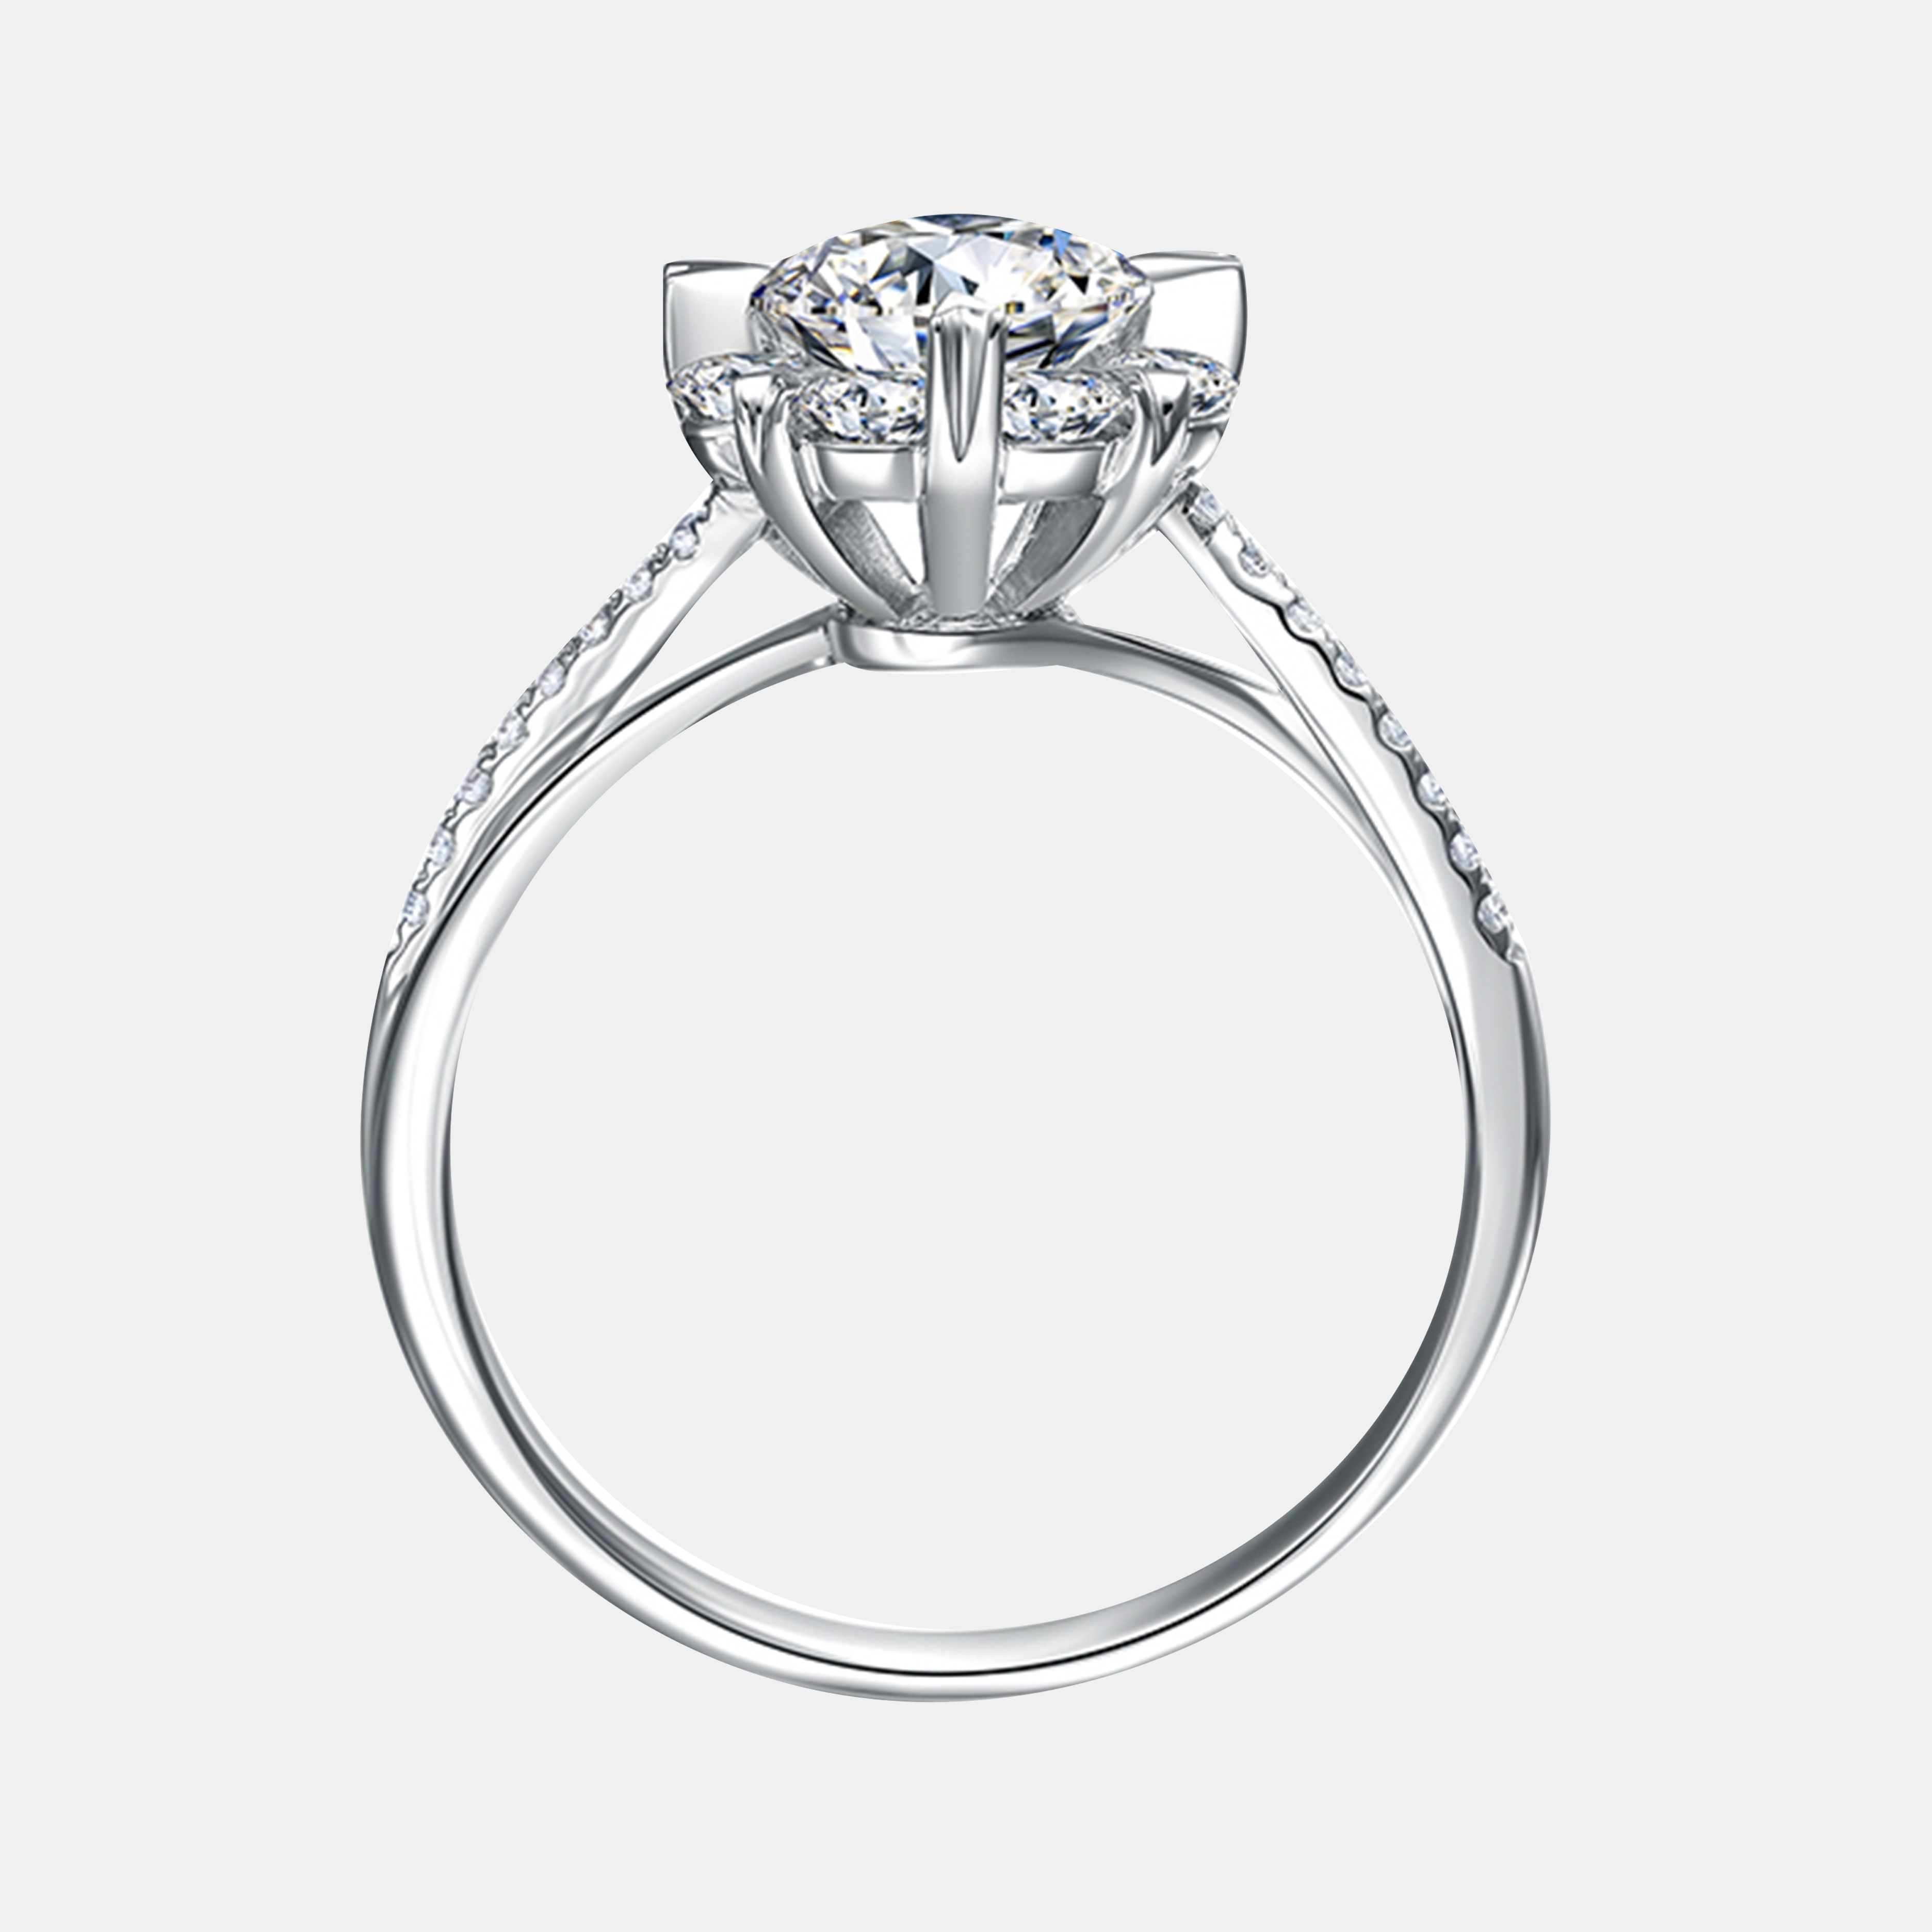 "The Oath" Pinched Lab Diamond Ring